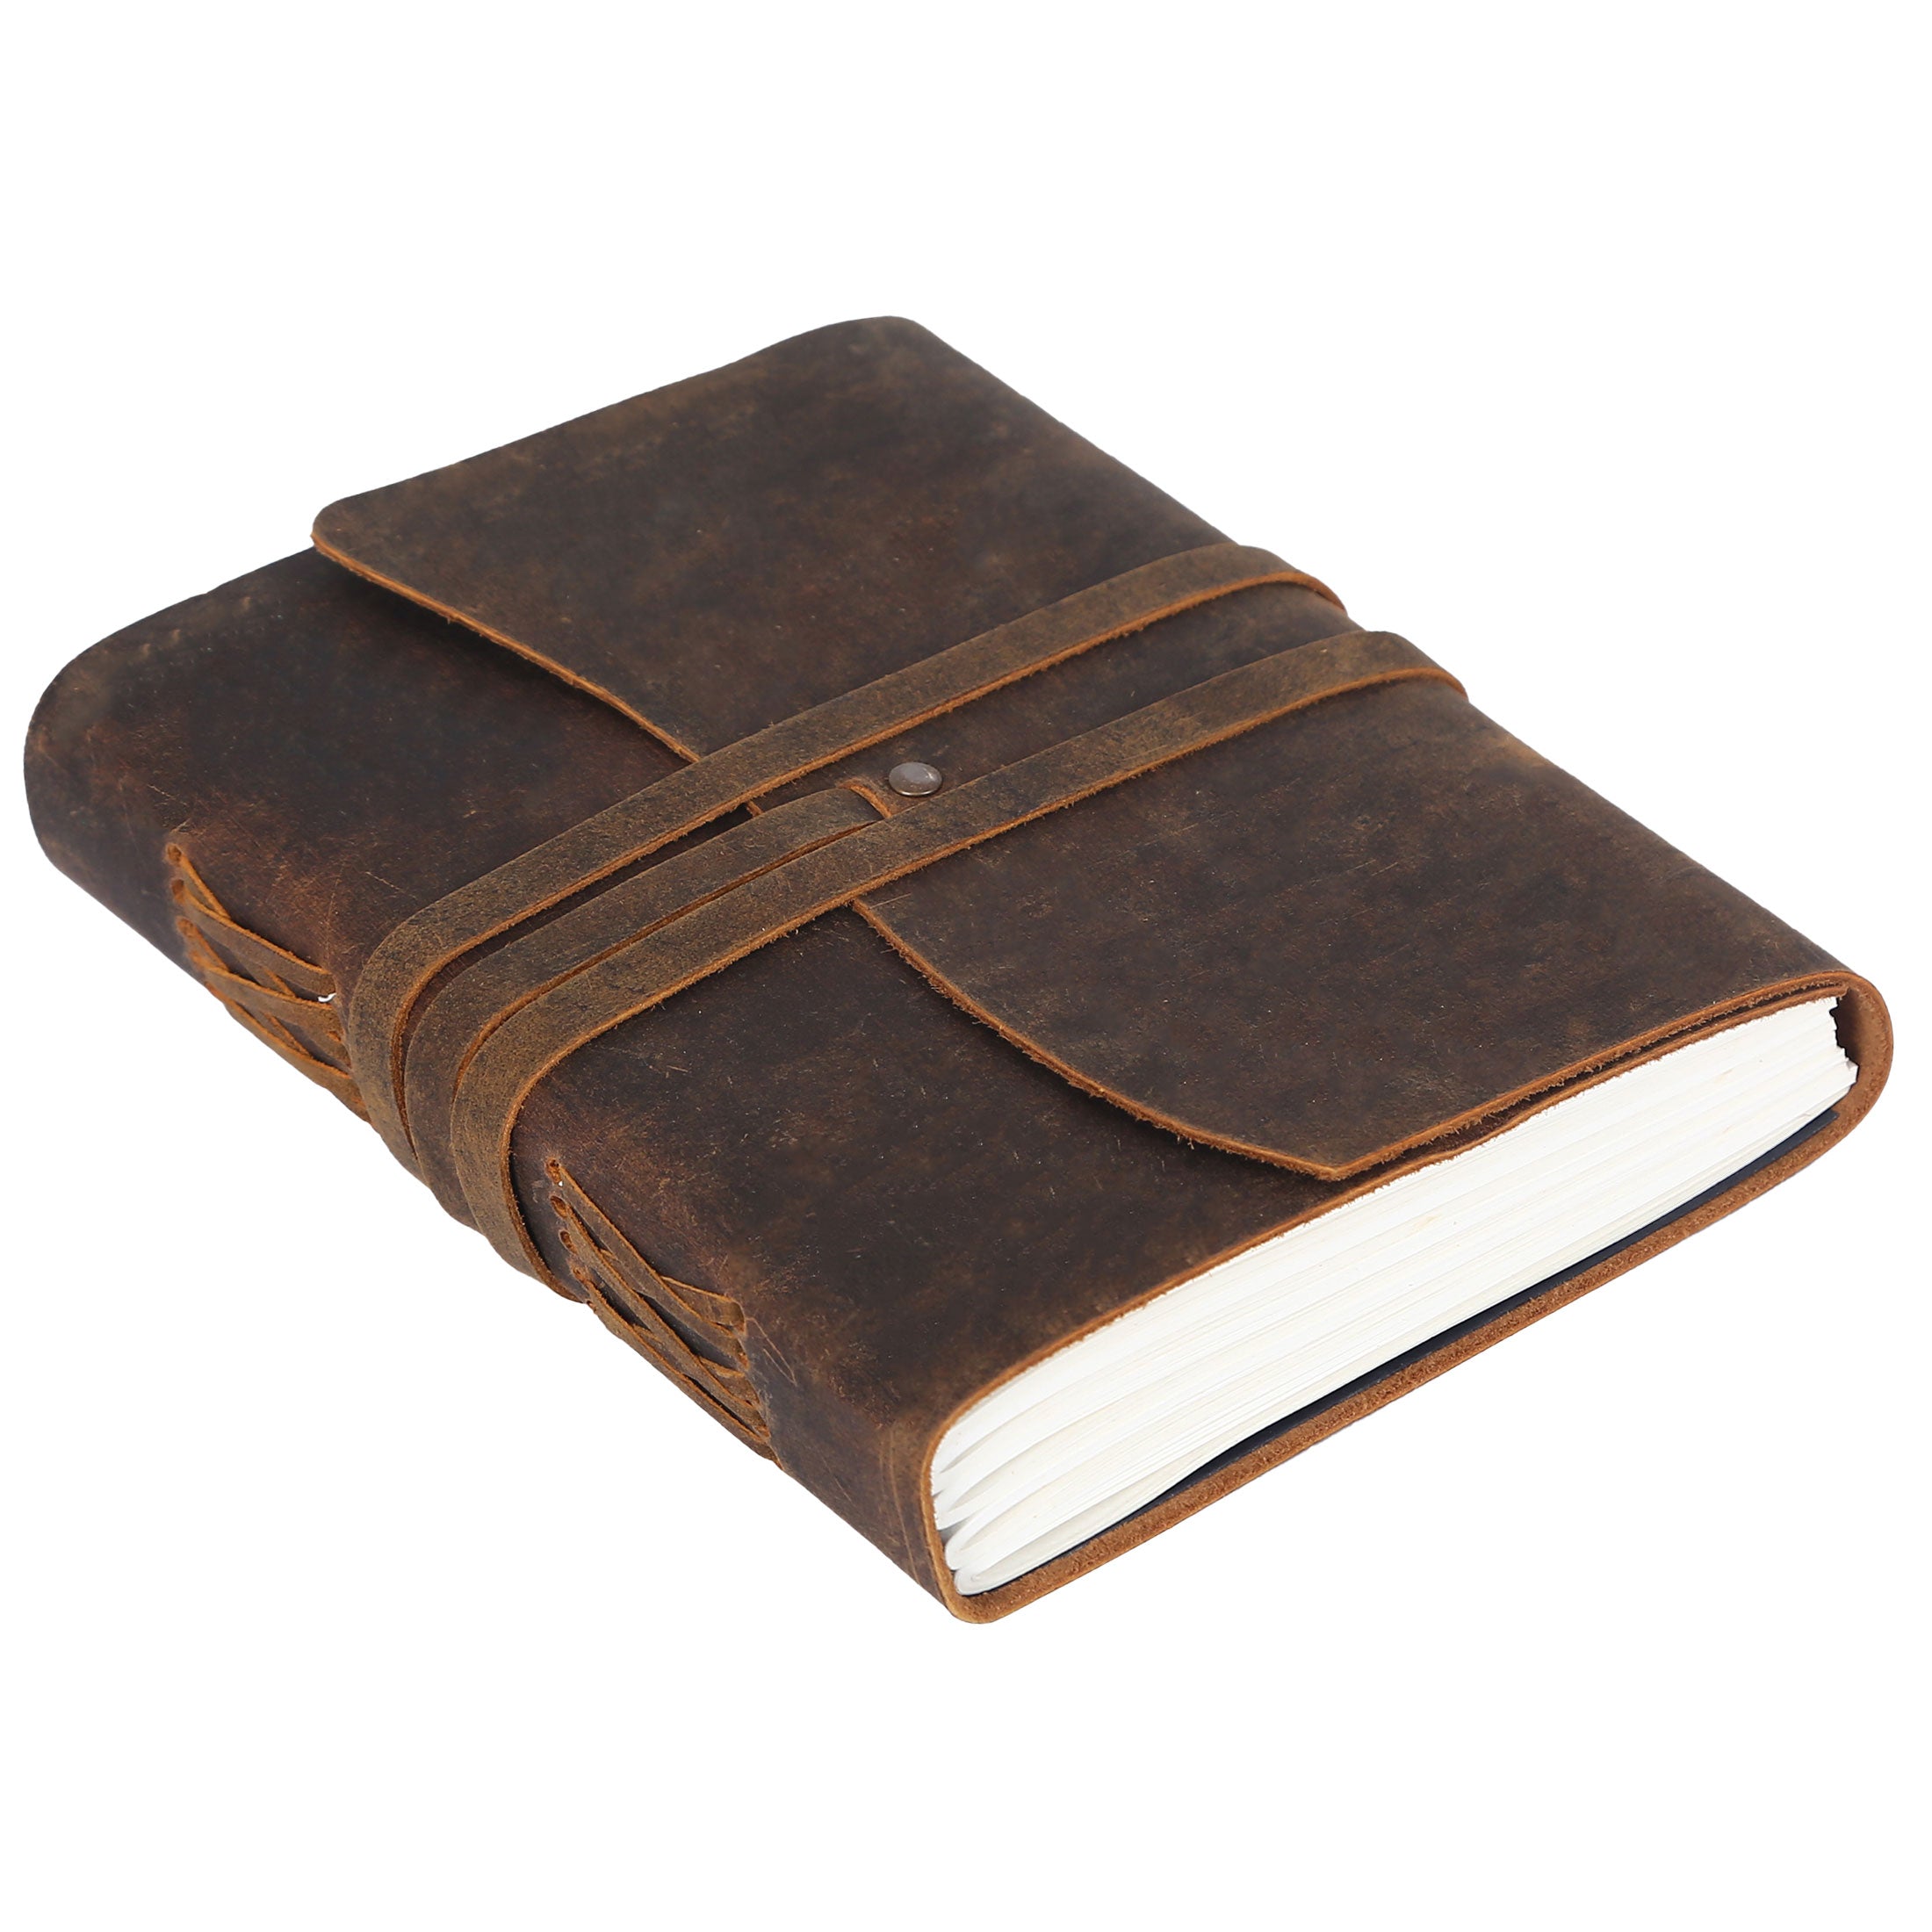 Leather Journal for Men Vintage Diary Writing Notebook, Unlined